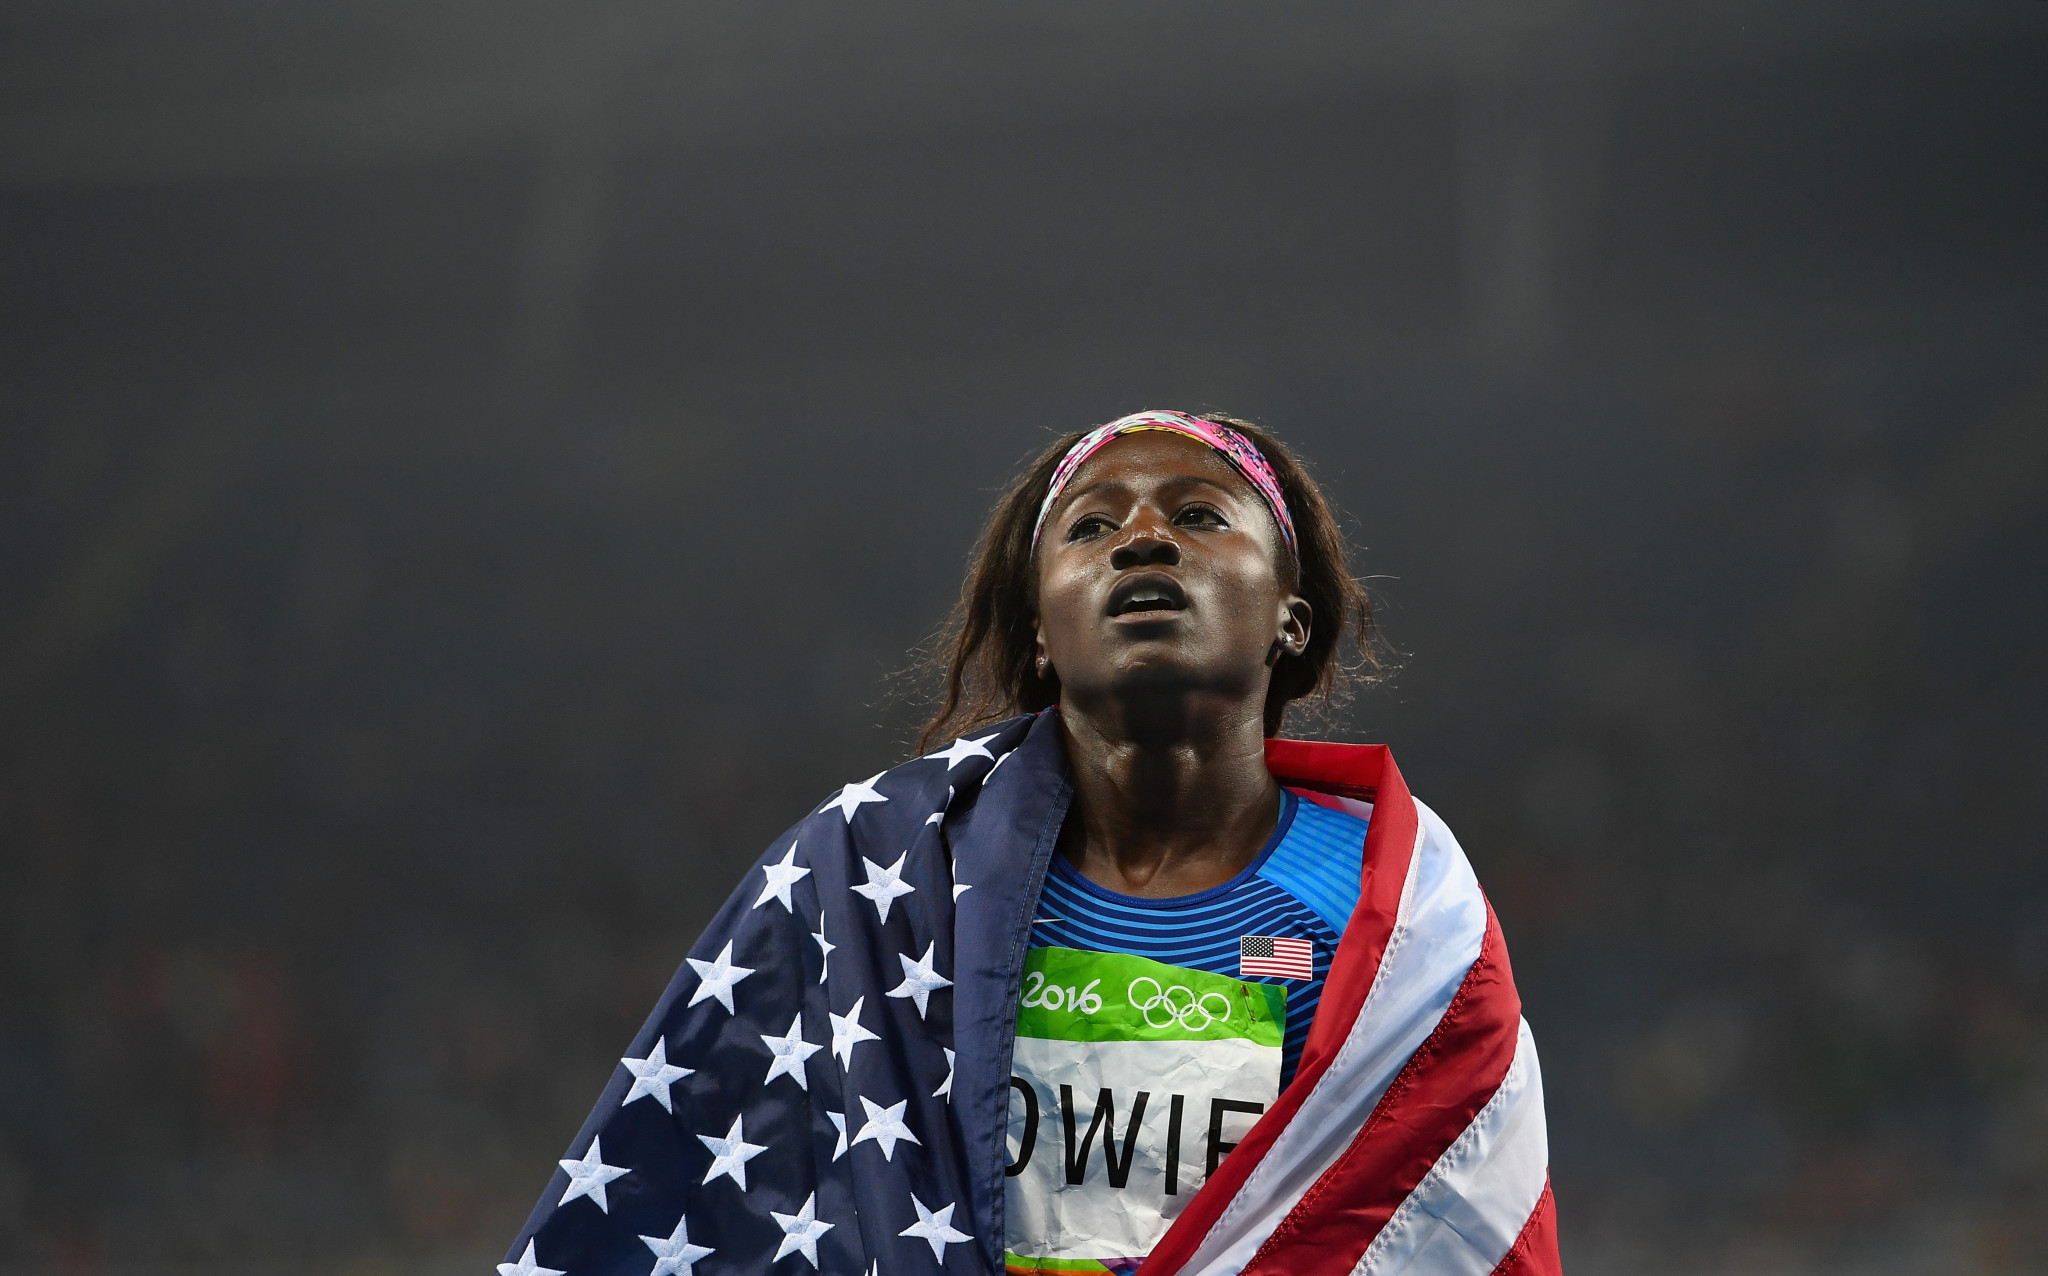 Deaths of United States Olympic medal-winning sprinters Bowie and Davis announced